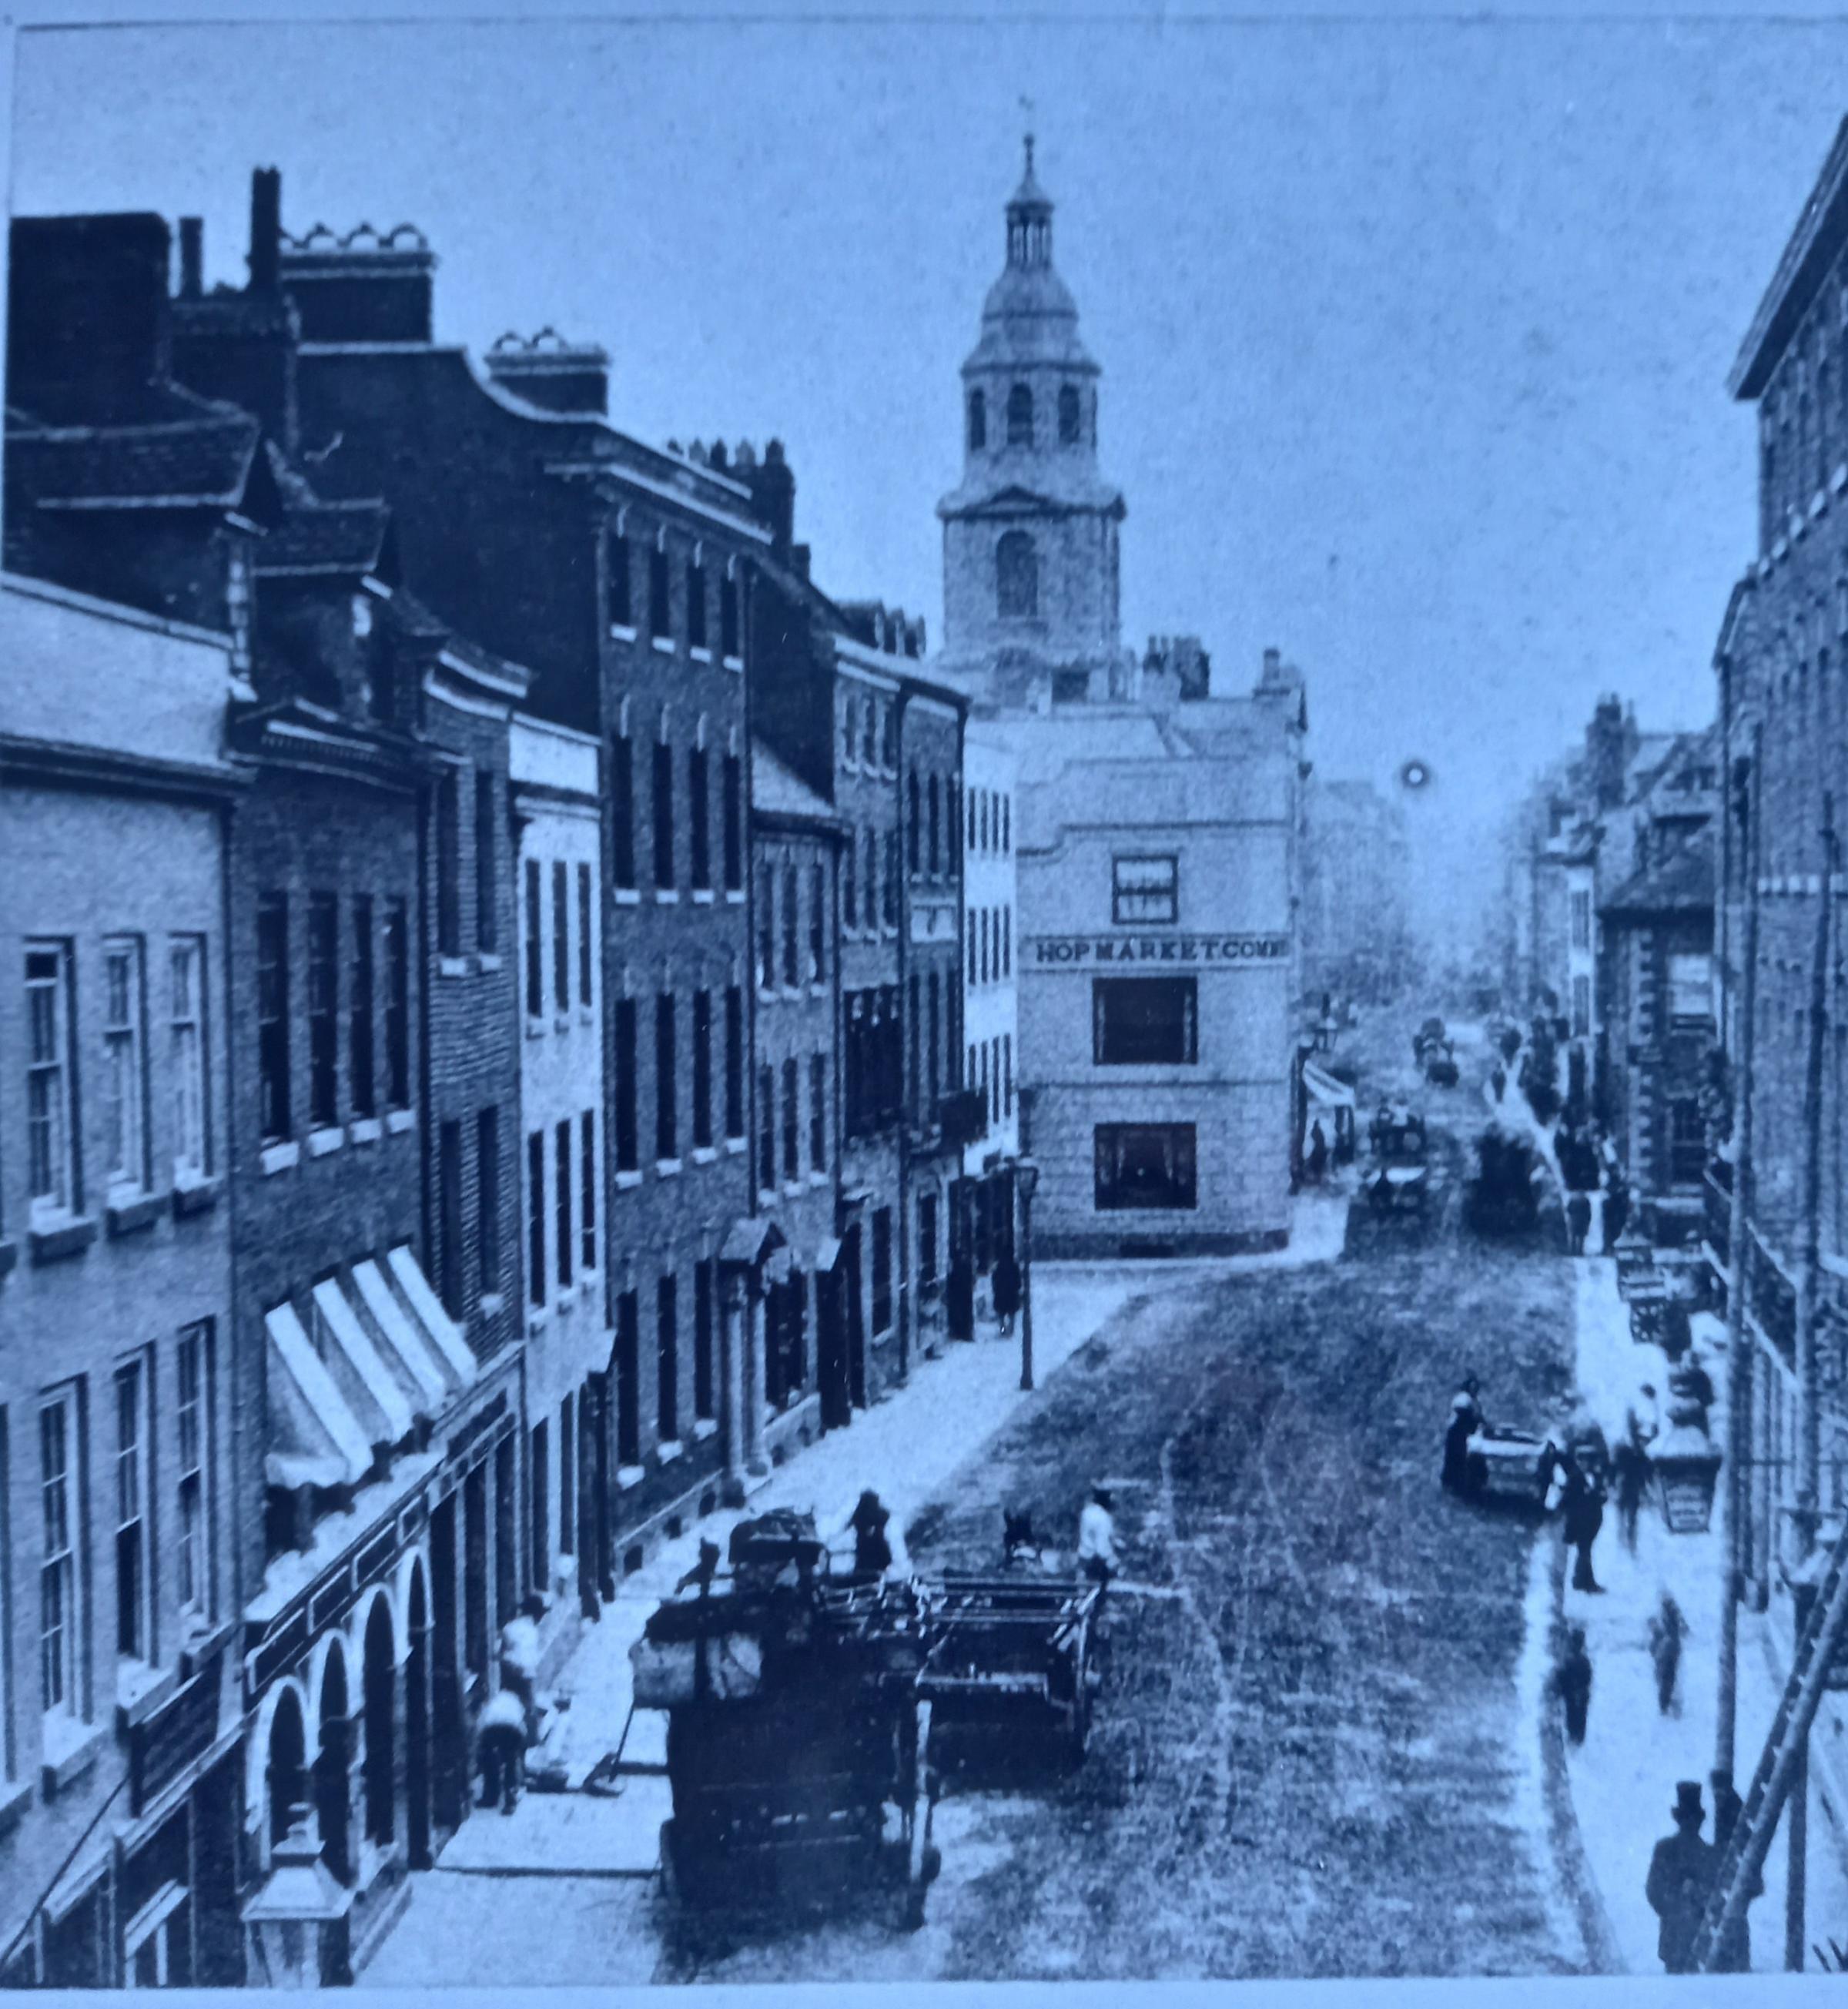 A Victorian view of Foregate Street taken from the railway bridge. See the height of the gentleman’s top hat, bottom right